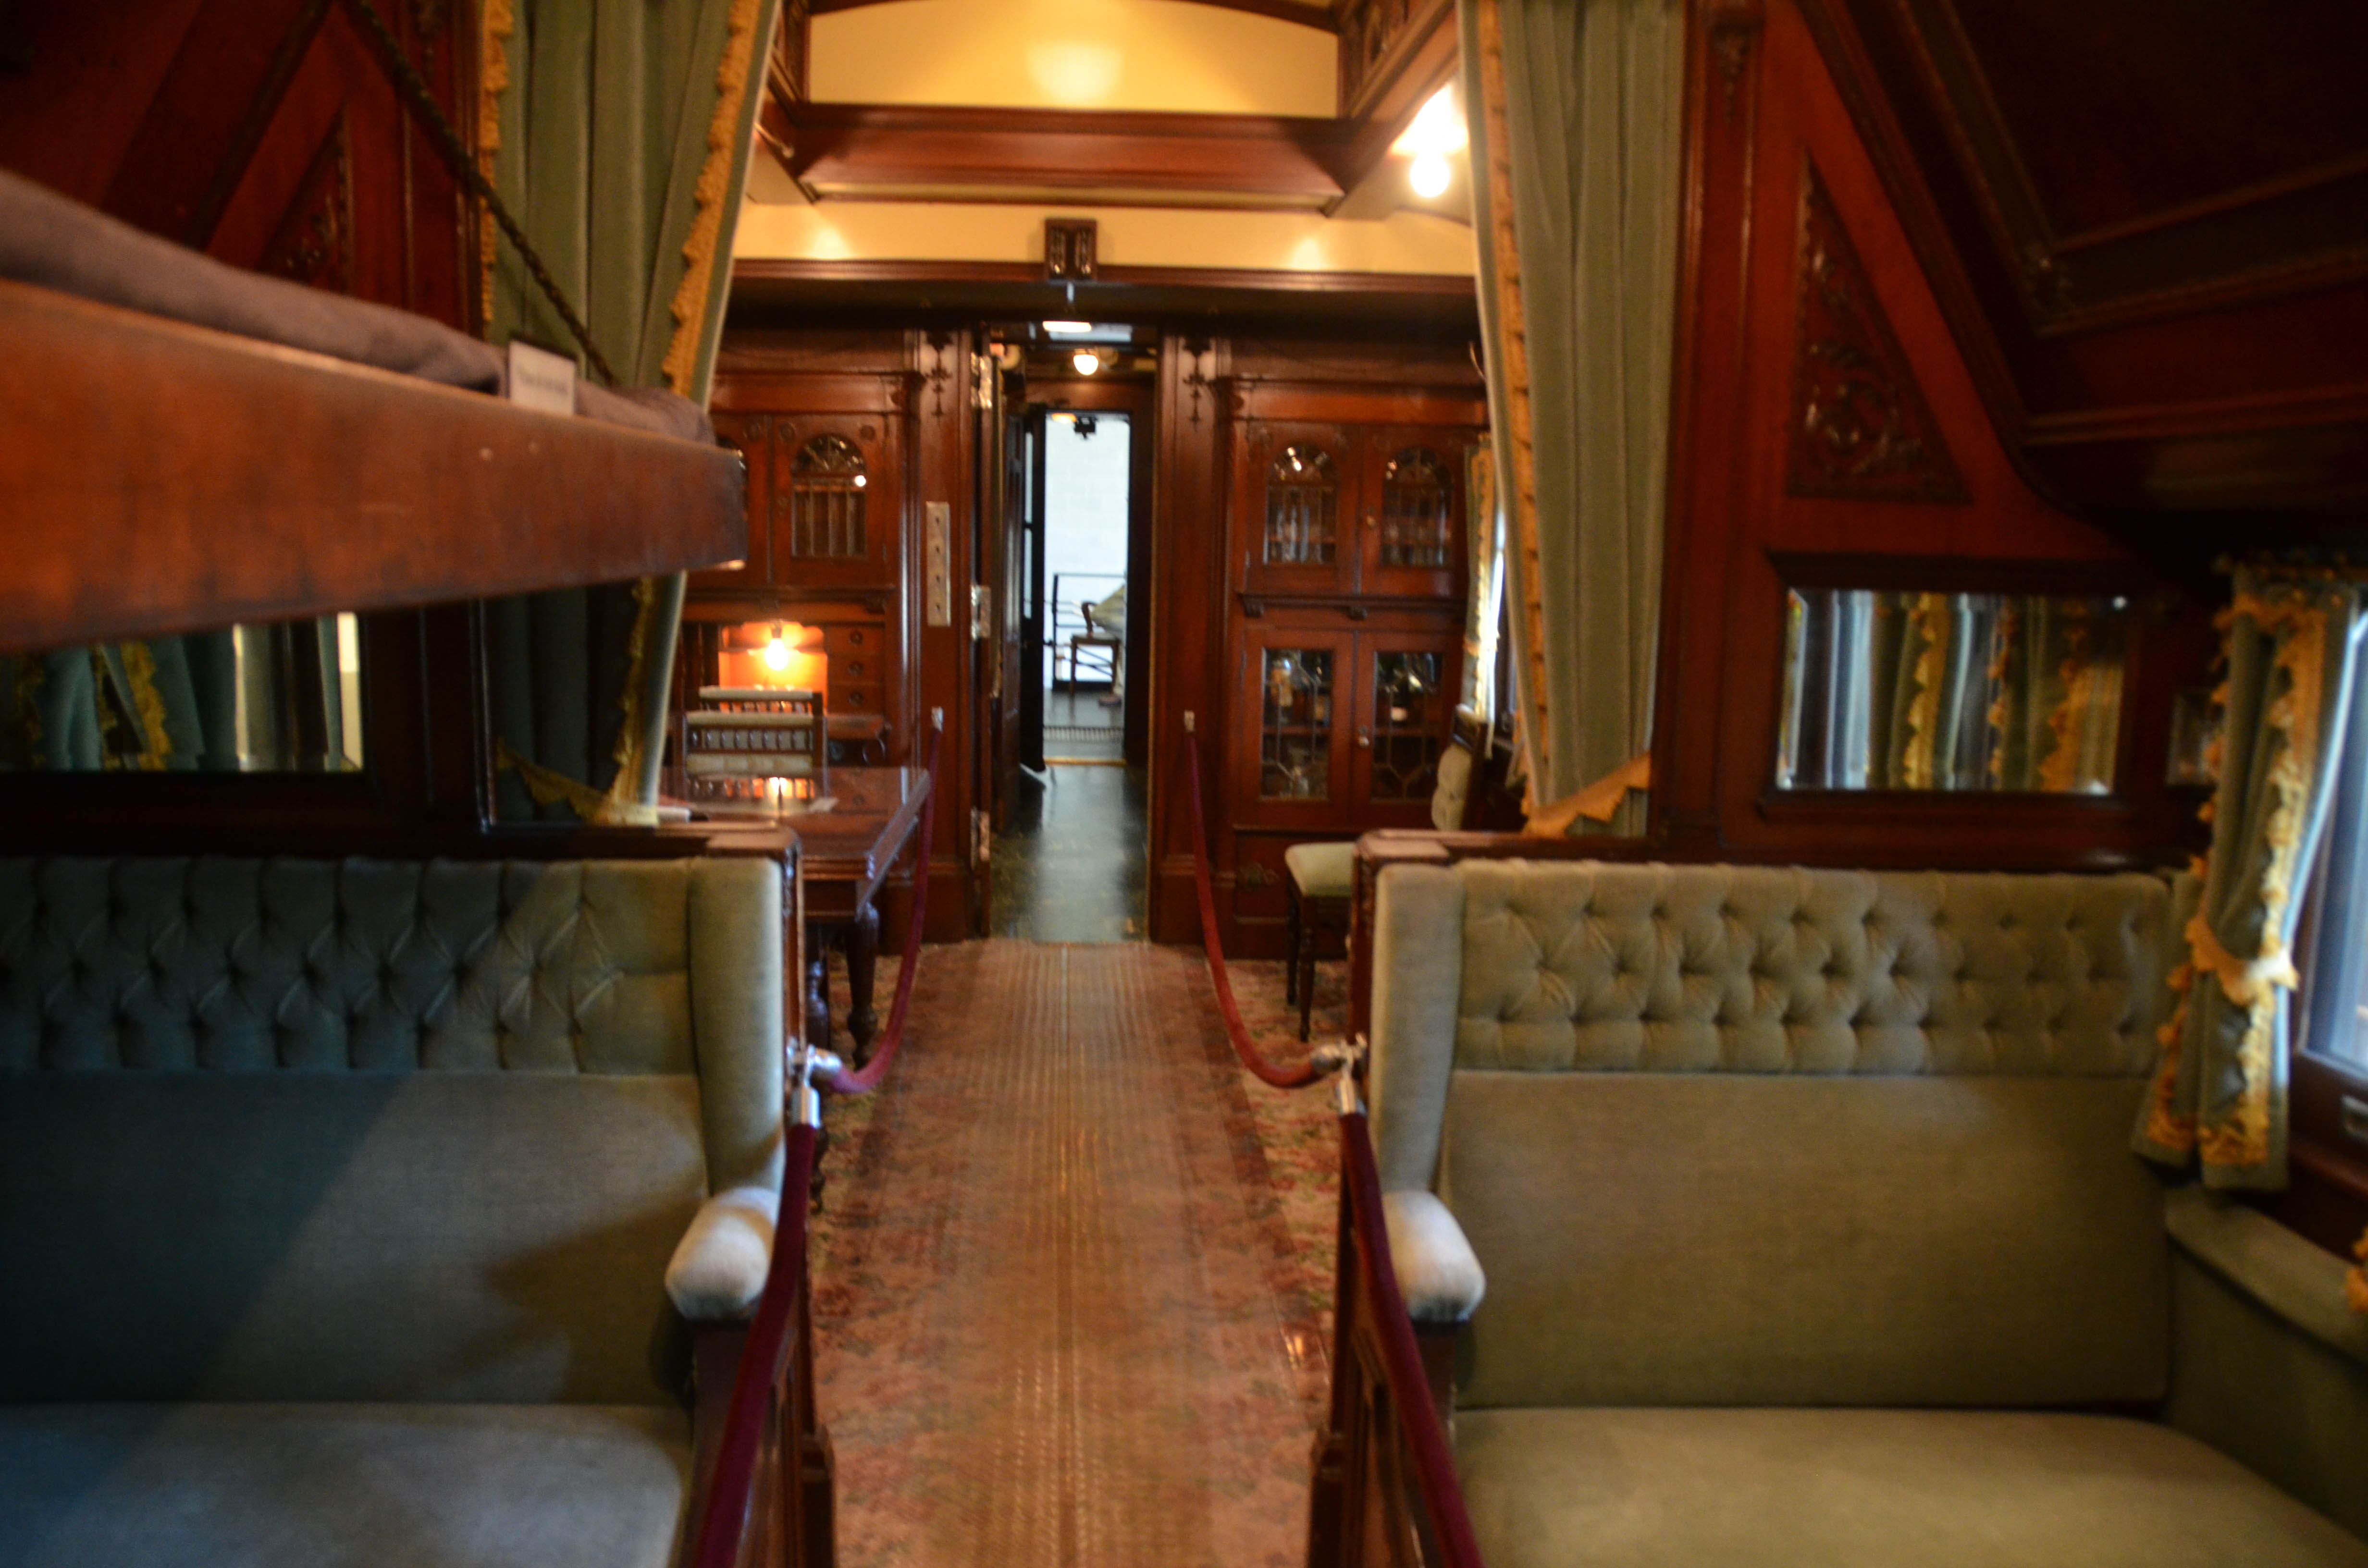 The rich and famous arrived in their own train cars.